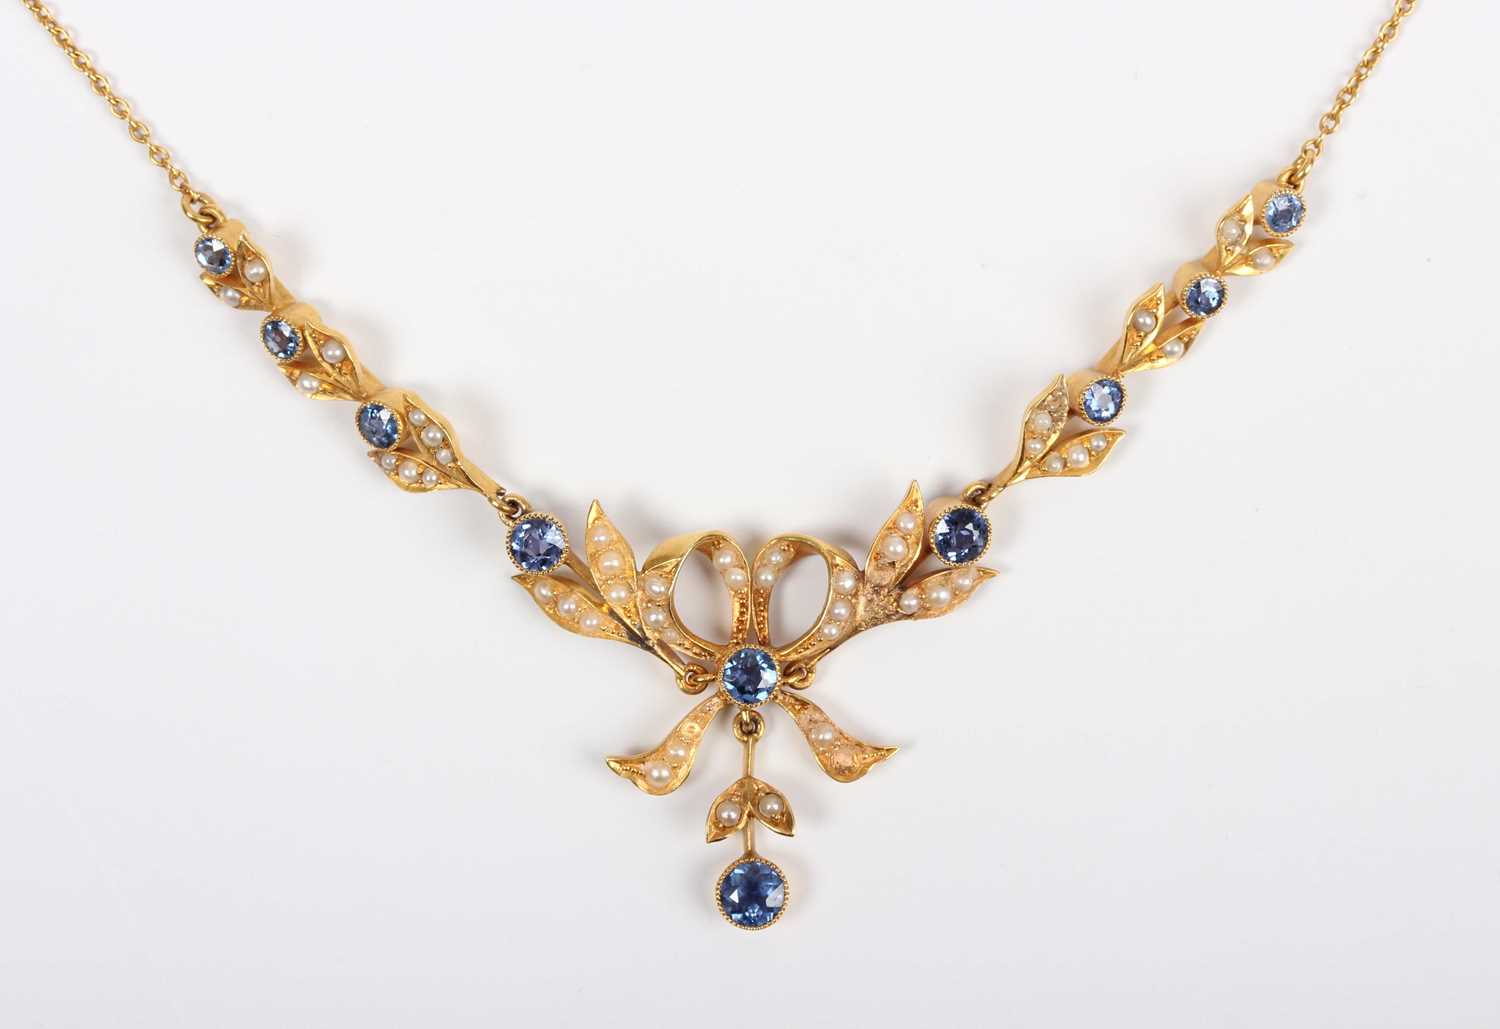 An Edwardian gold, sapphire and seed pearl necklace, the front designed as a tied bow with foliate